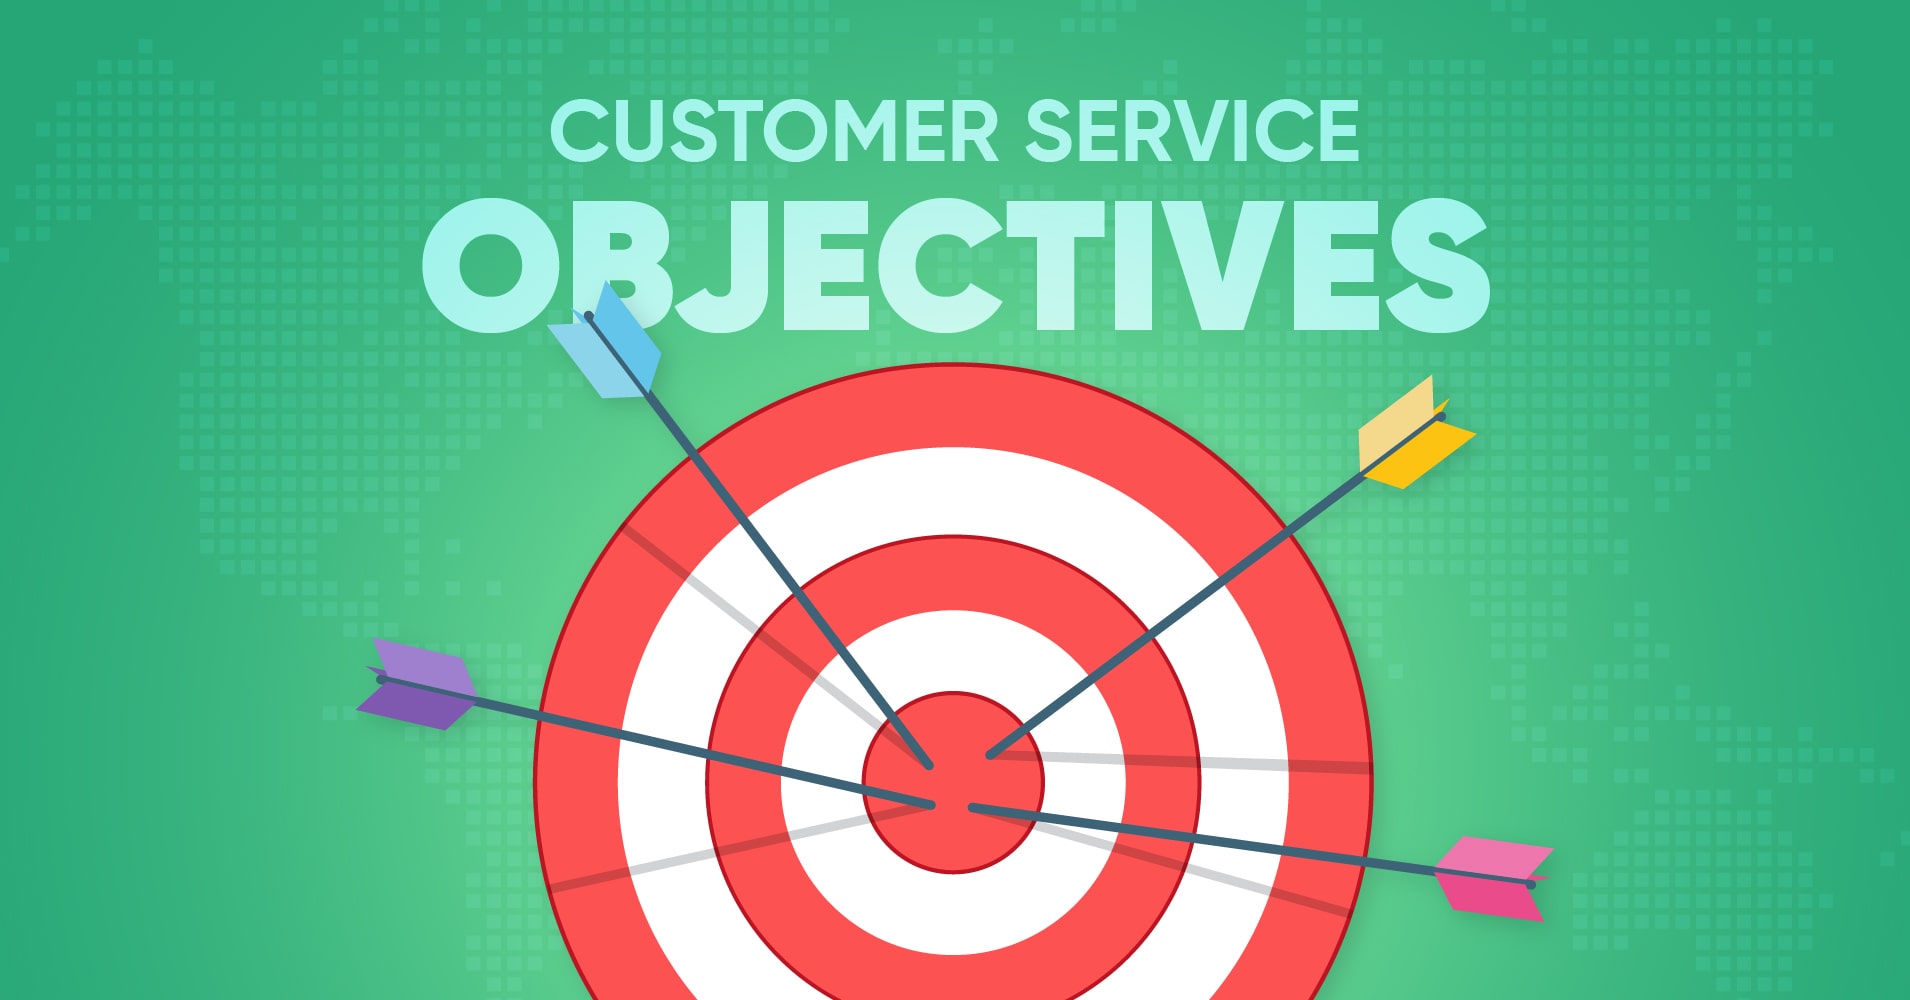 8 Customer Service Objectives Small Business Should Follow